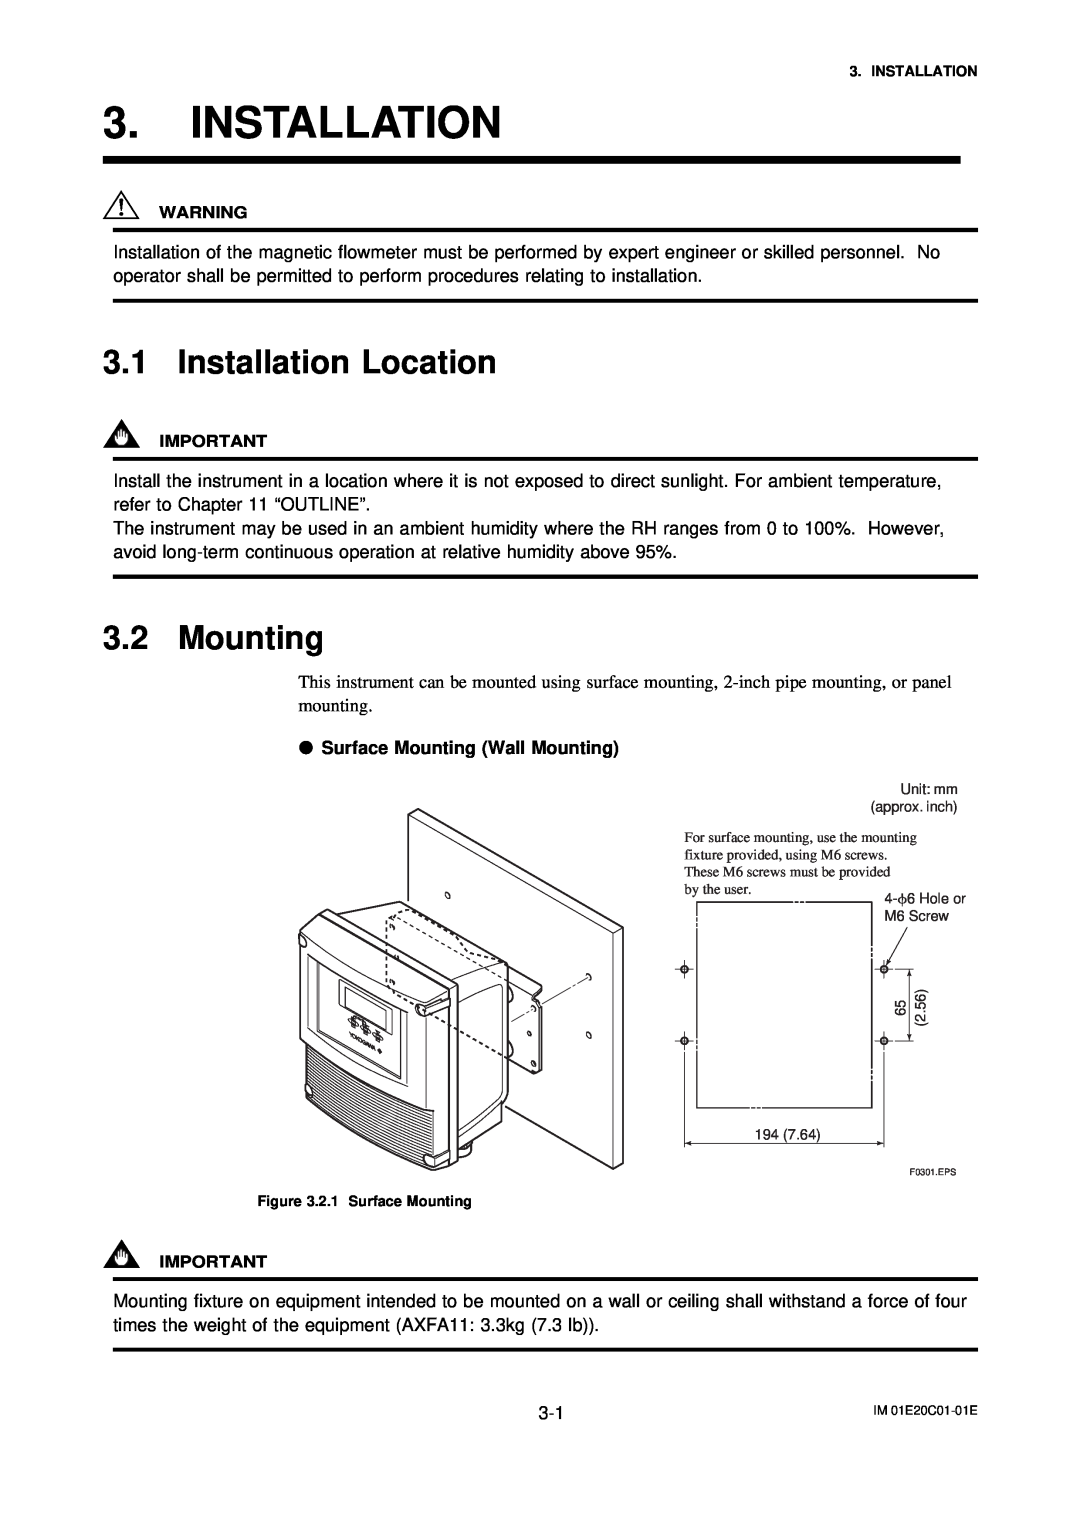 APC AXFA11G user manual Installation Location, Surface Mounting Wall Mounting 